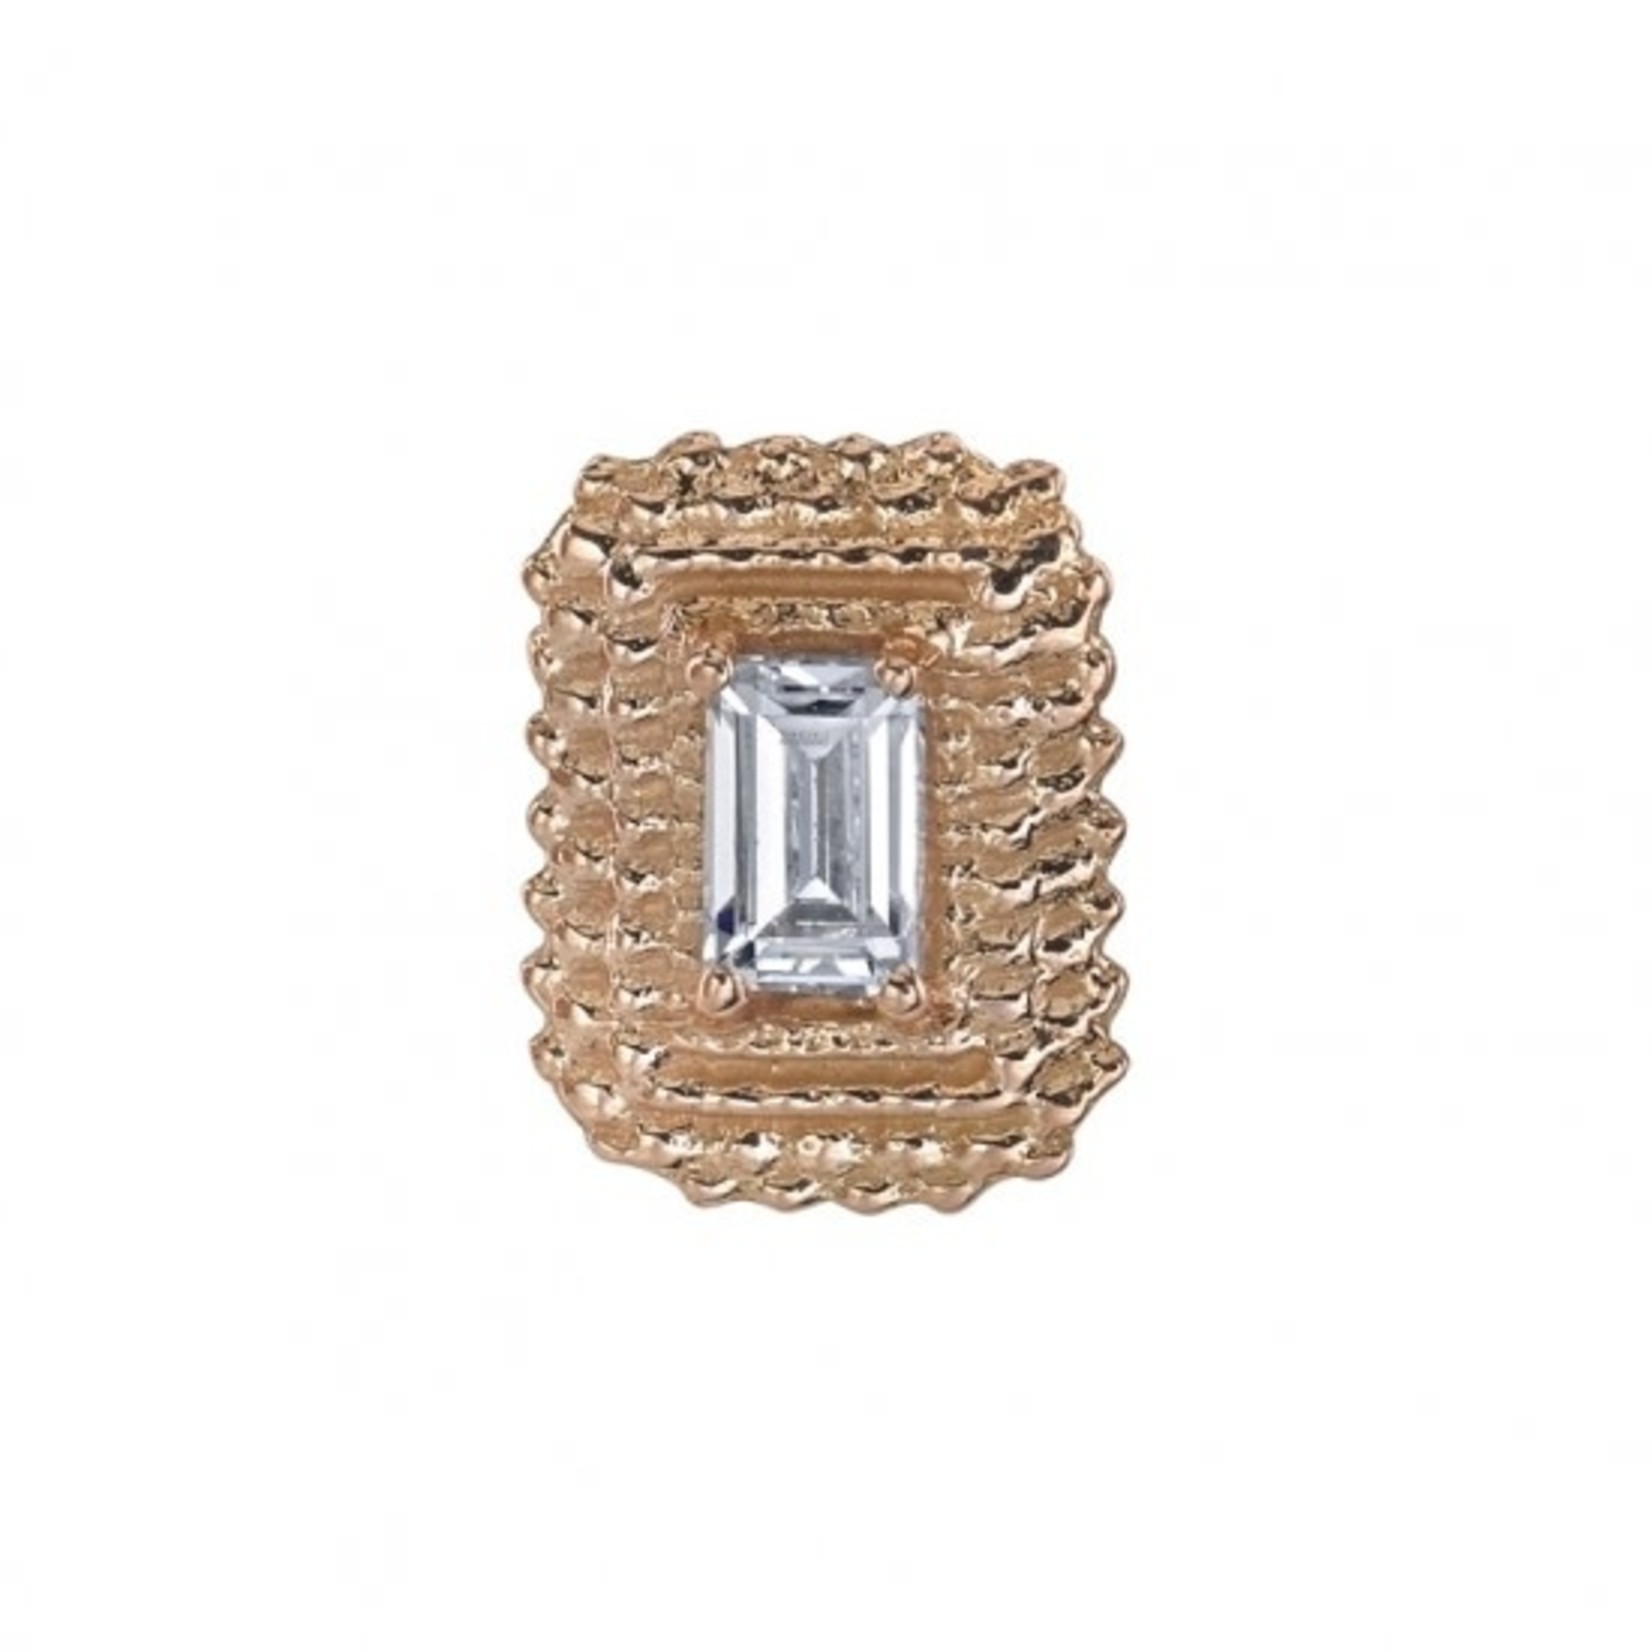 BVLA BVLA 7x5 "Afghan Baguette" threaded end with 3x2 CZ baguette